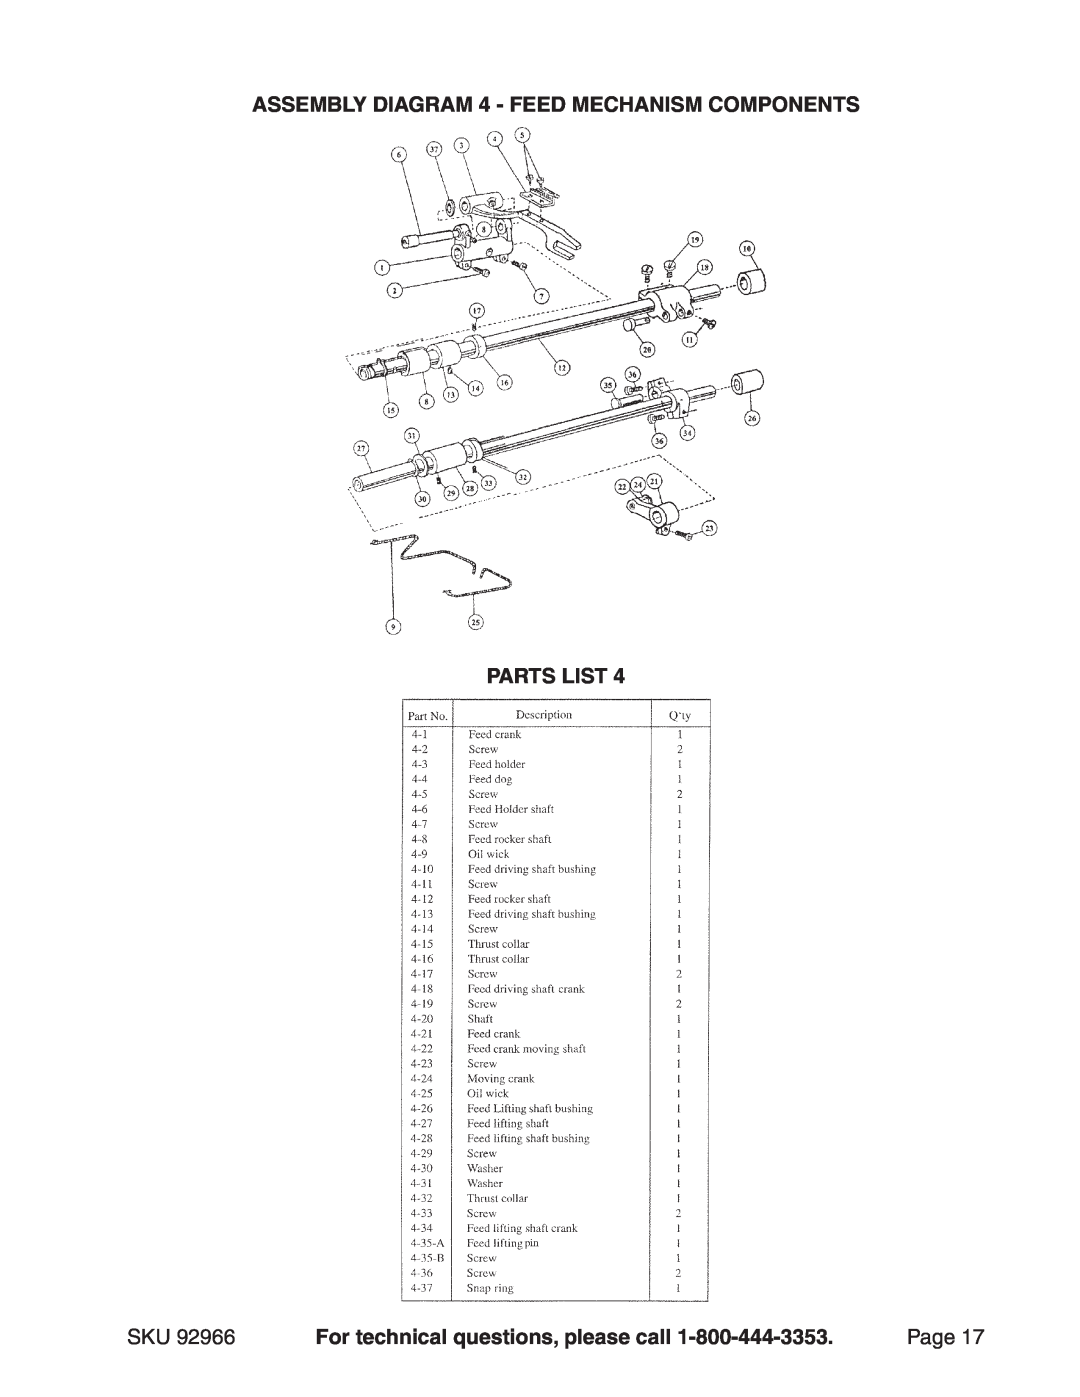 Harbor Freight Tools 92966 manual ASSEMBLY Diagram 4 - Feed Mechanism Components, Parts List, Page 